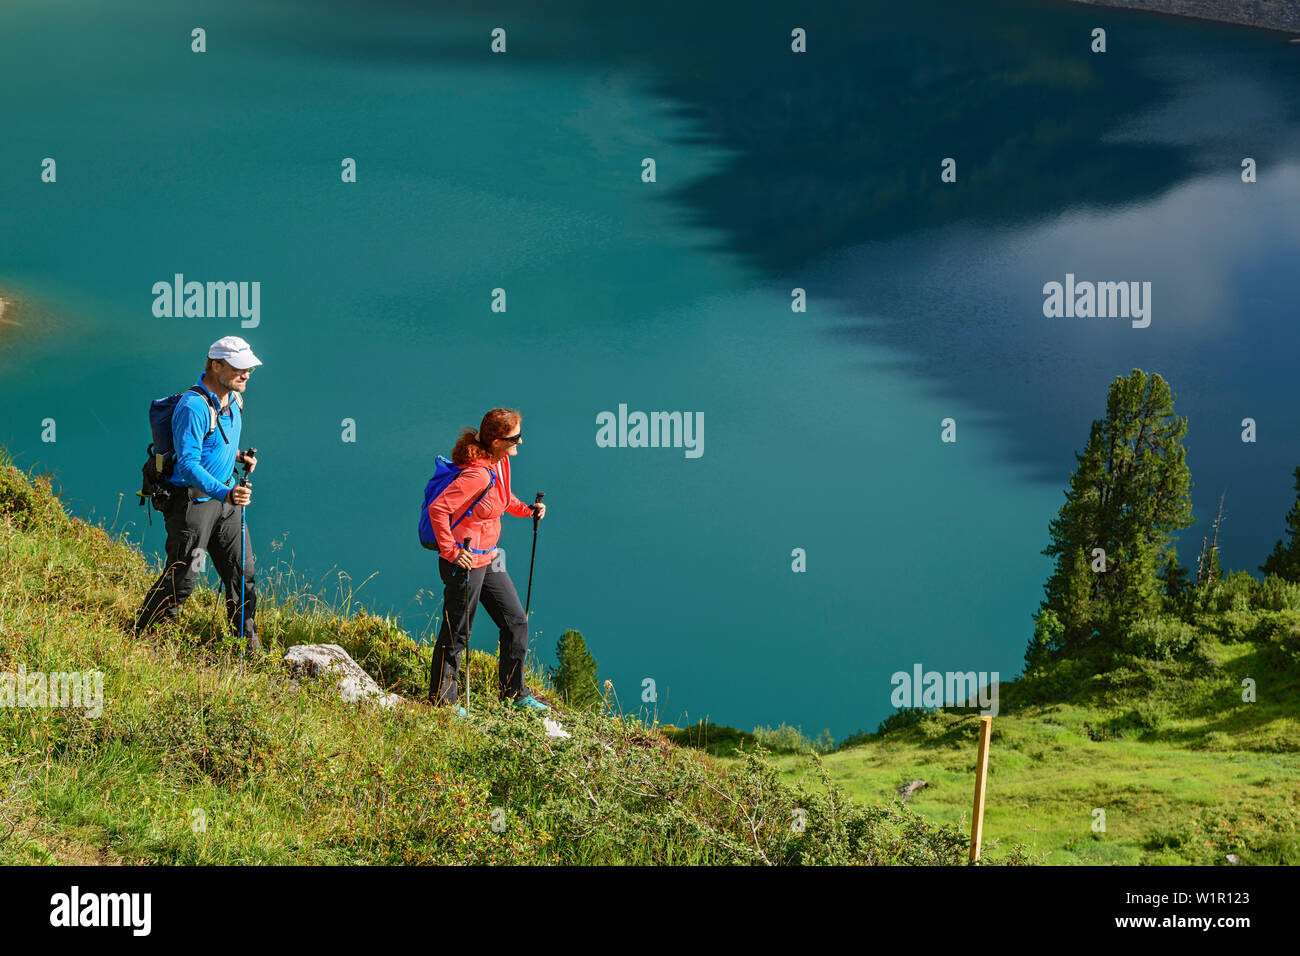 A man and a woman, Lechweg hiking above the Salvar Insee, Lech source mountains, Vorarlberg, Austria Stock Photo